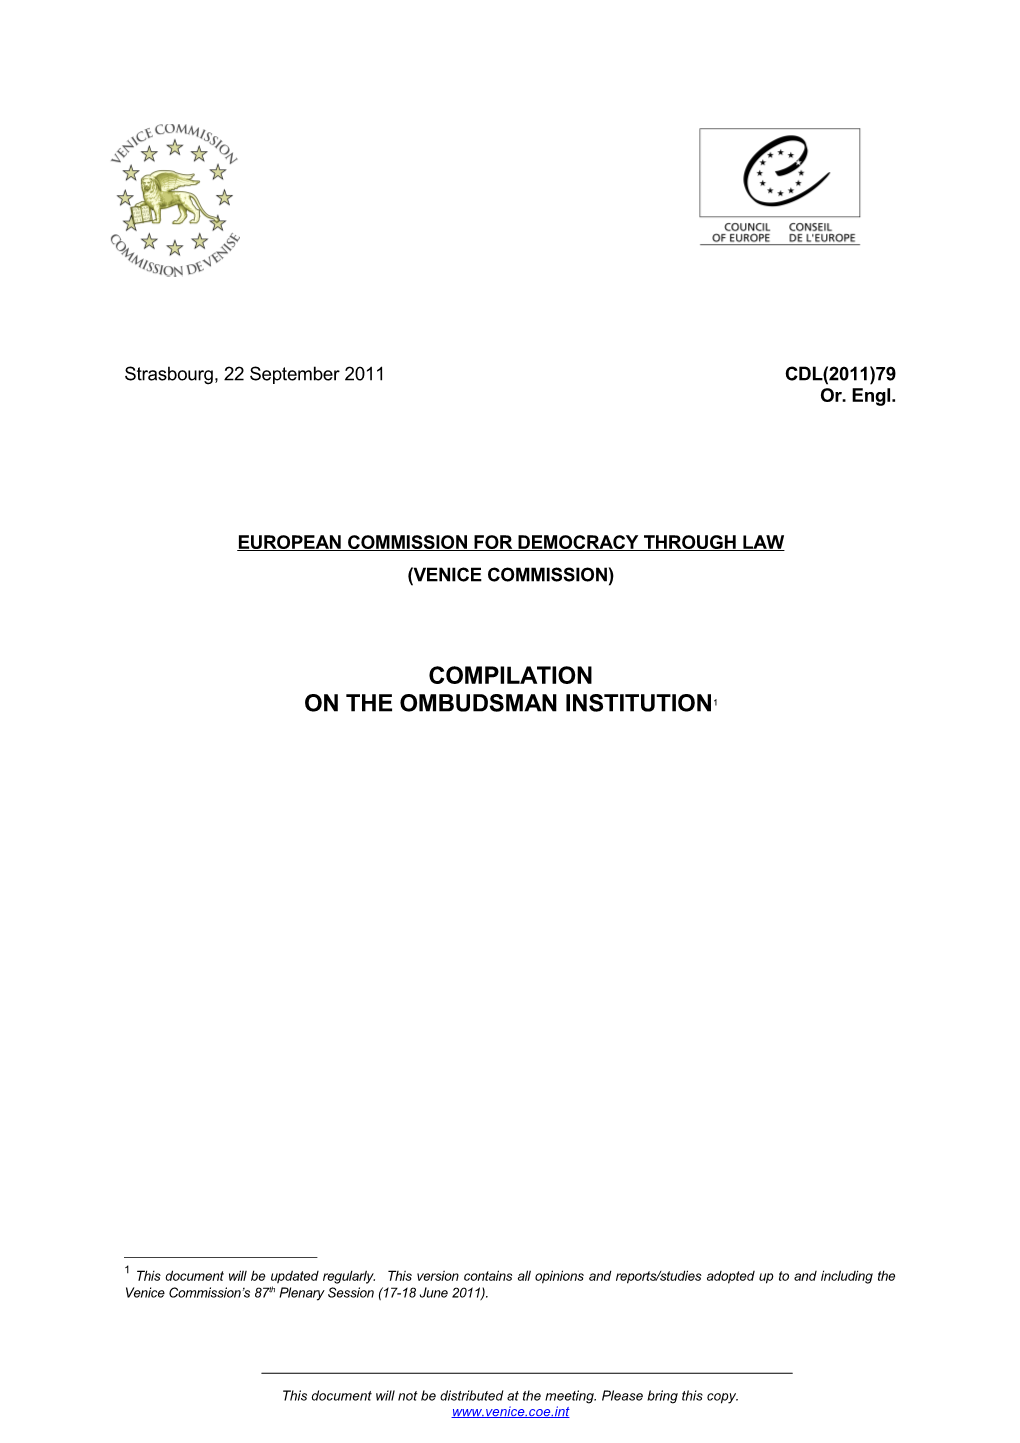 European Commission for Democracy Through Law